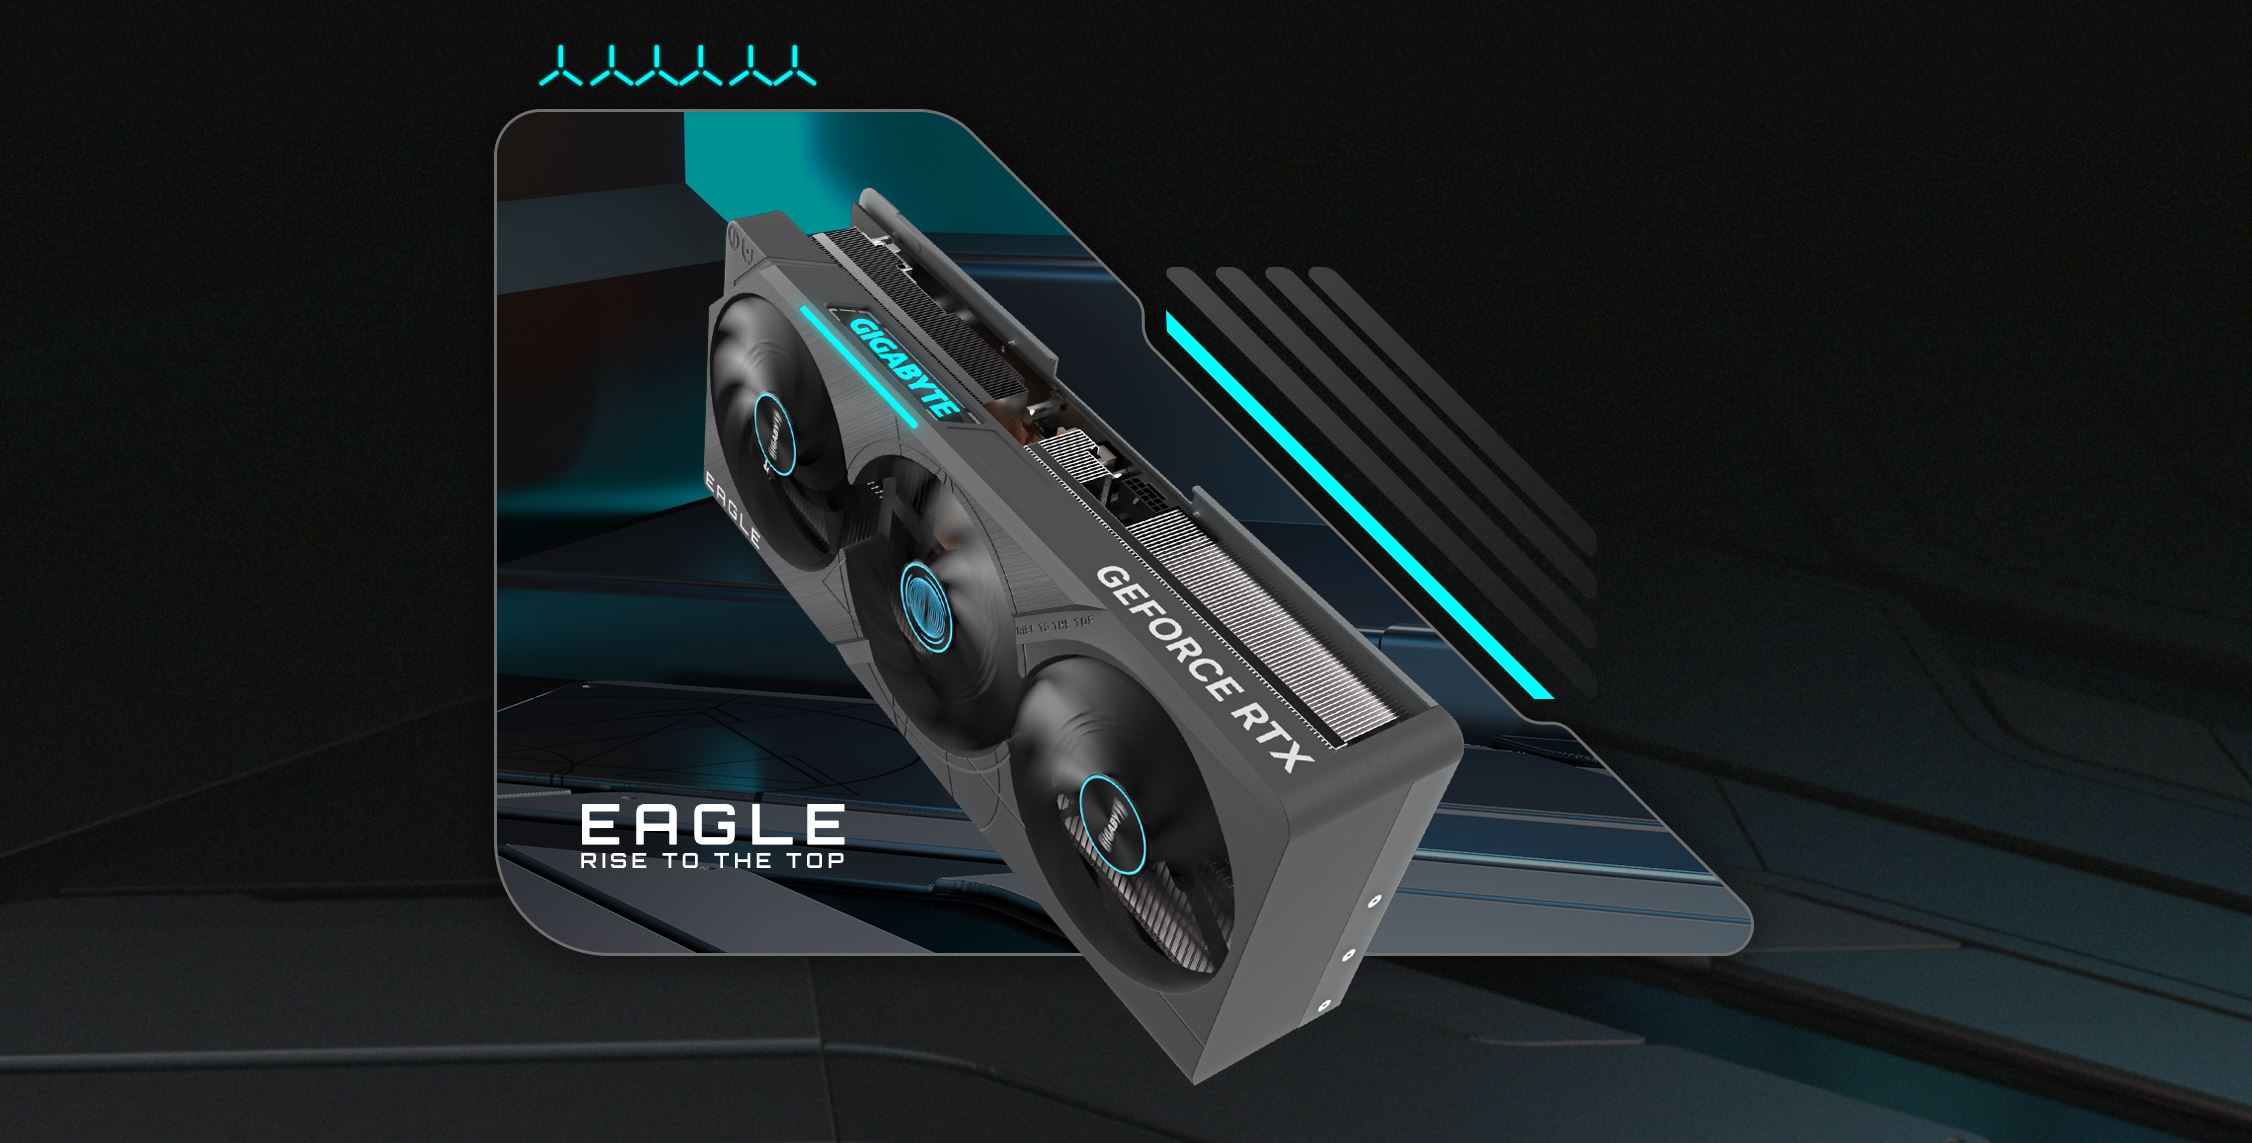 Just bought a used Gigabyte RTX 4080 Eagle : r/nvidia